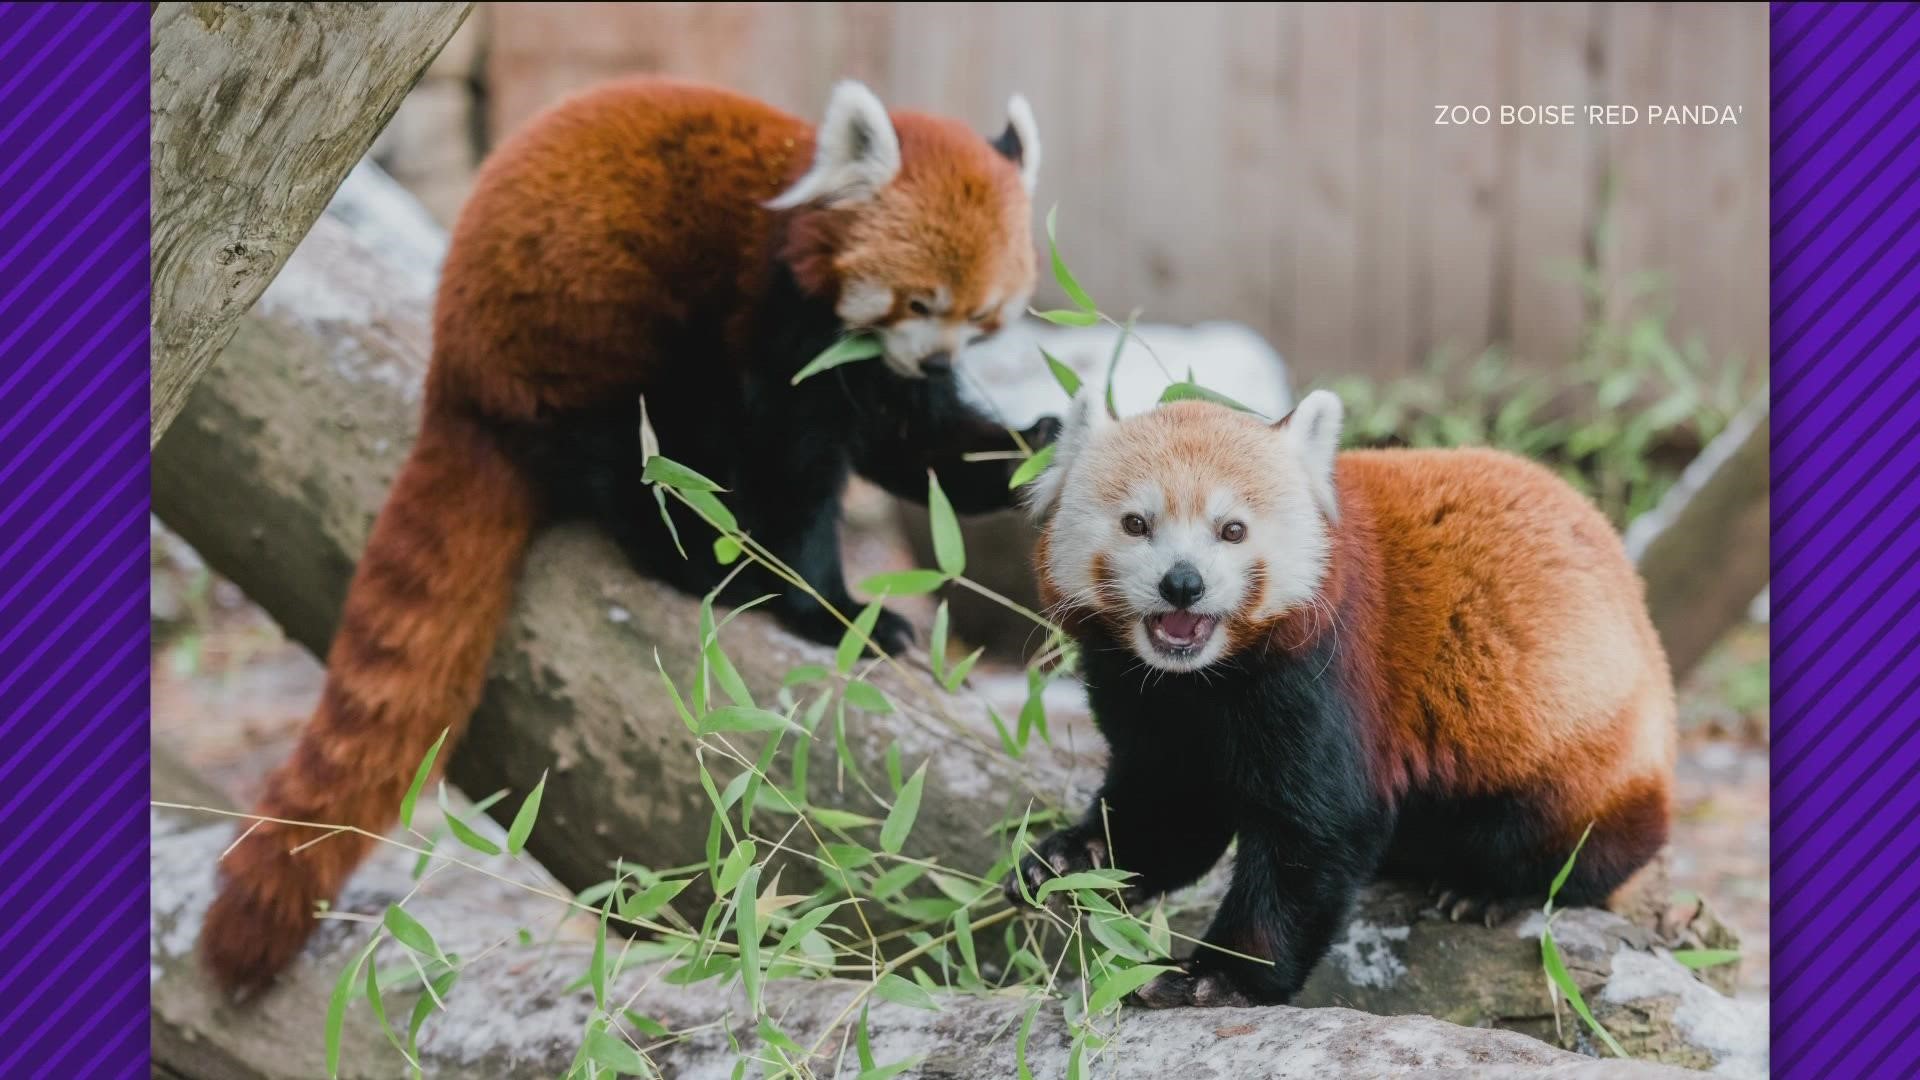 The M.J. Murdock Charitable Trust donated $750,000 to the Boise Rescue Mission and $500,000 to Zoo Boise. It will be used for new housing and the red panda exhibit.